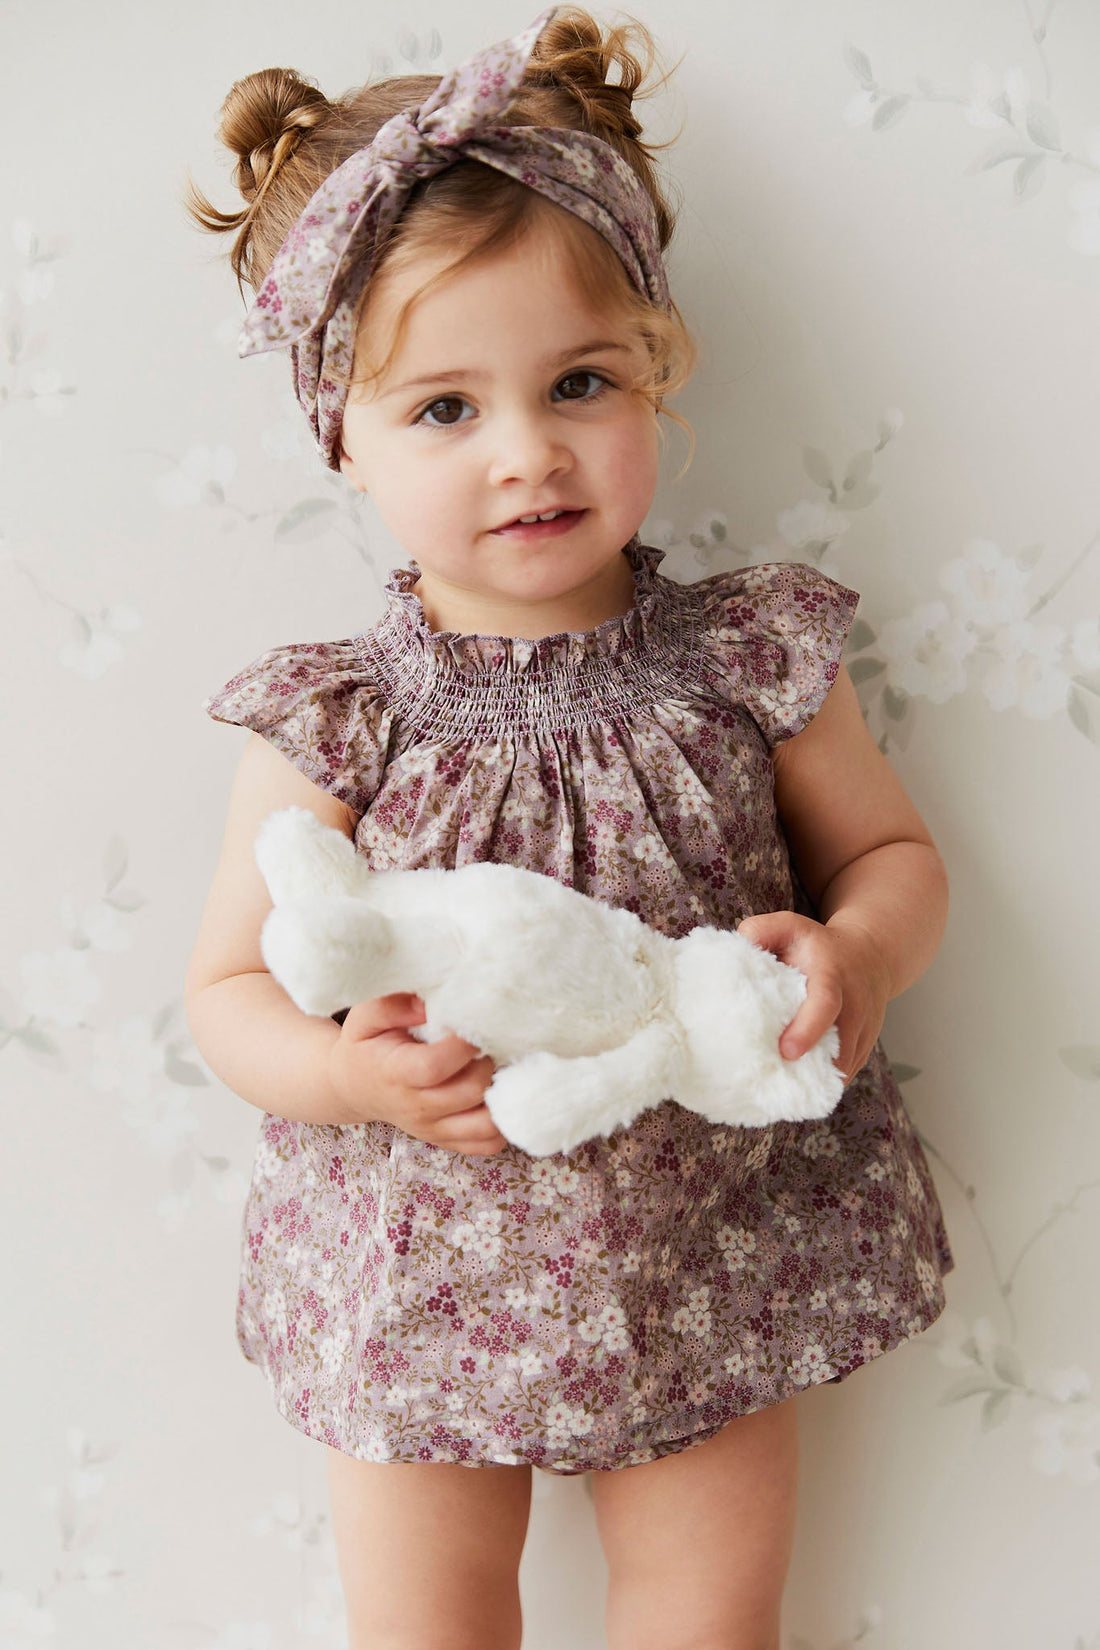 Organic Cotton Tamara Top - Pansy Floral Fawn Childrens Top from Jamie Kay NZ